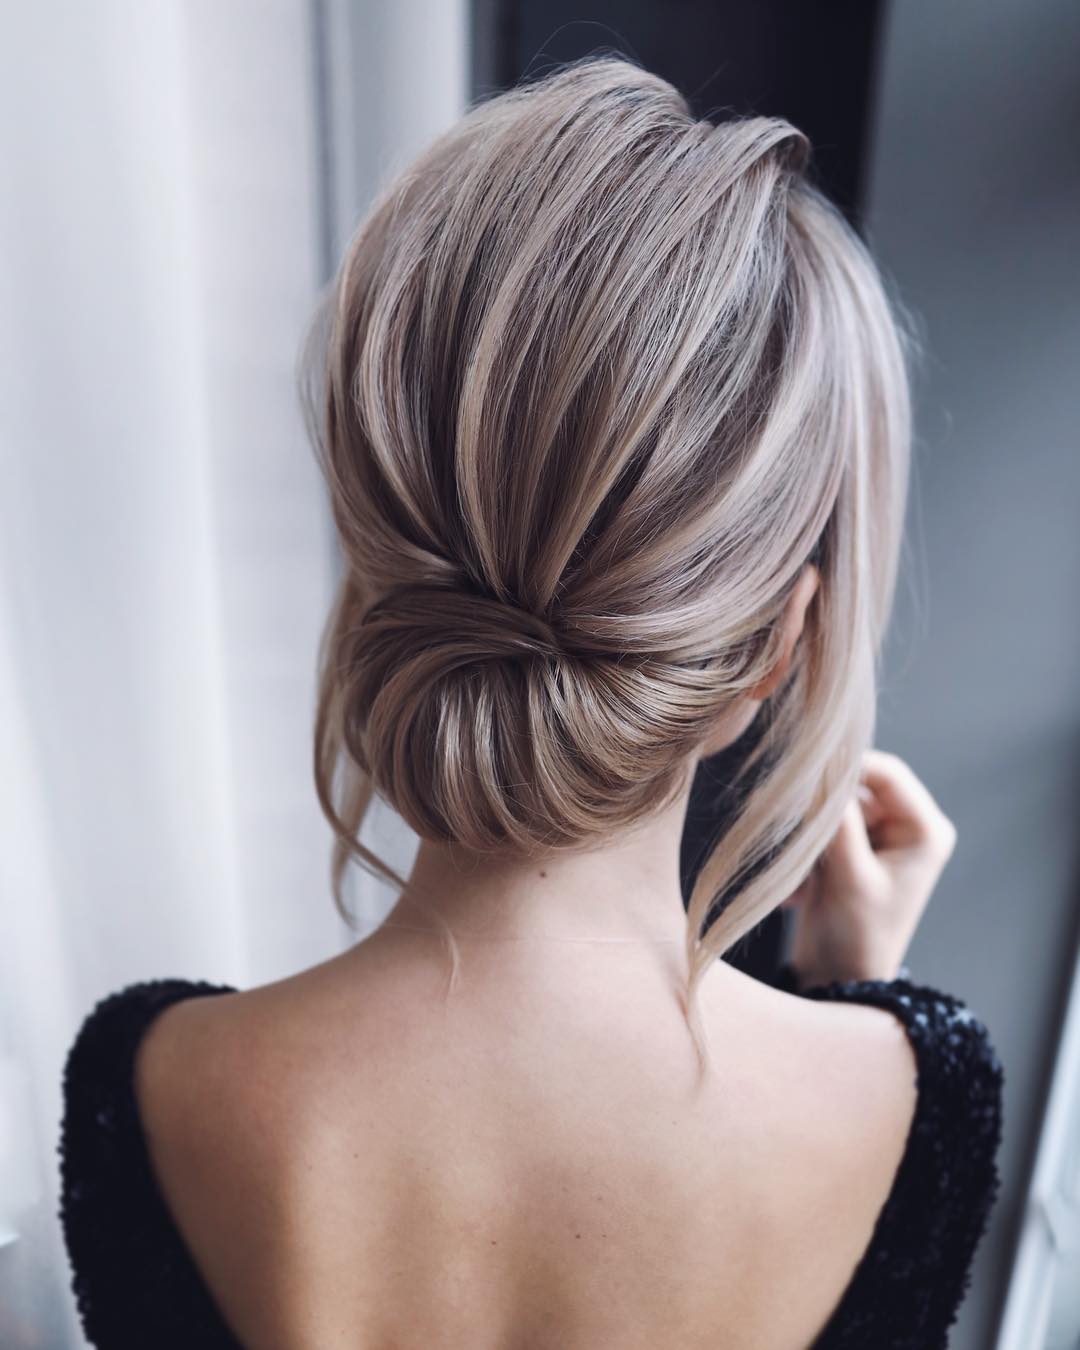 10 Updos for Medium Length Hair - Prom & Homecoming ...